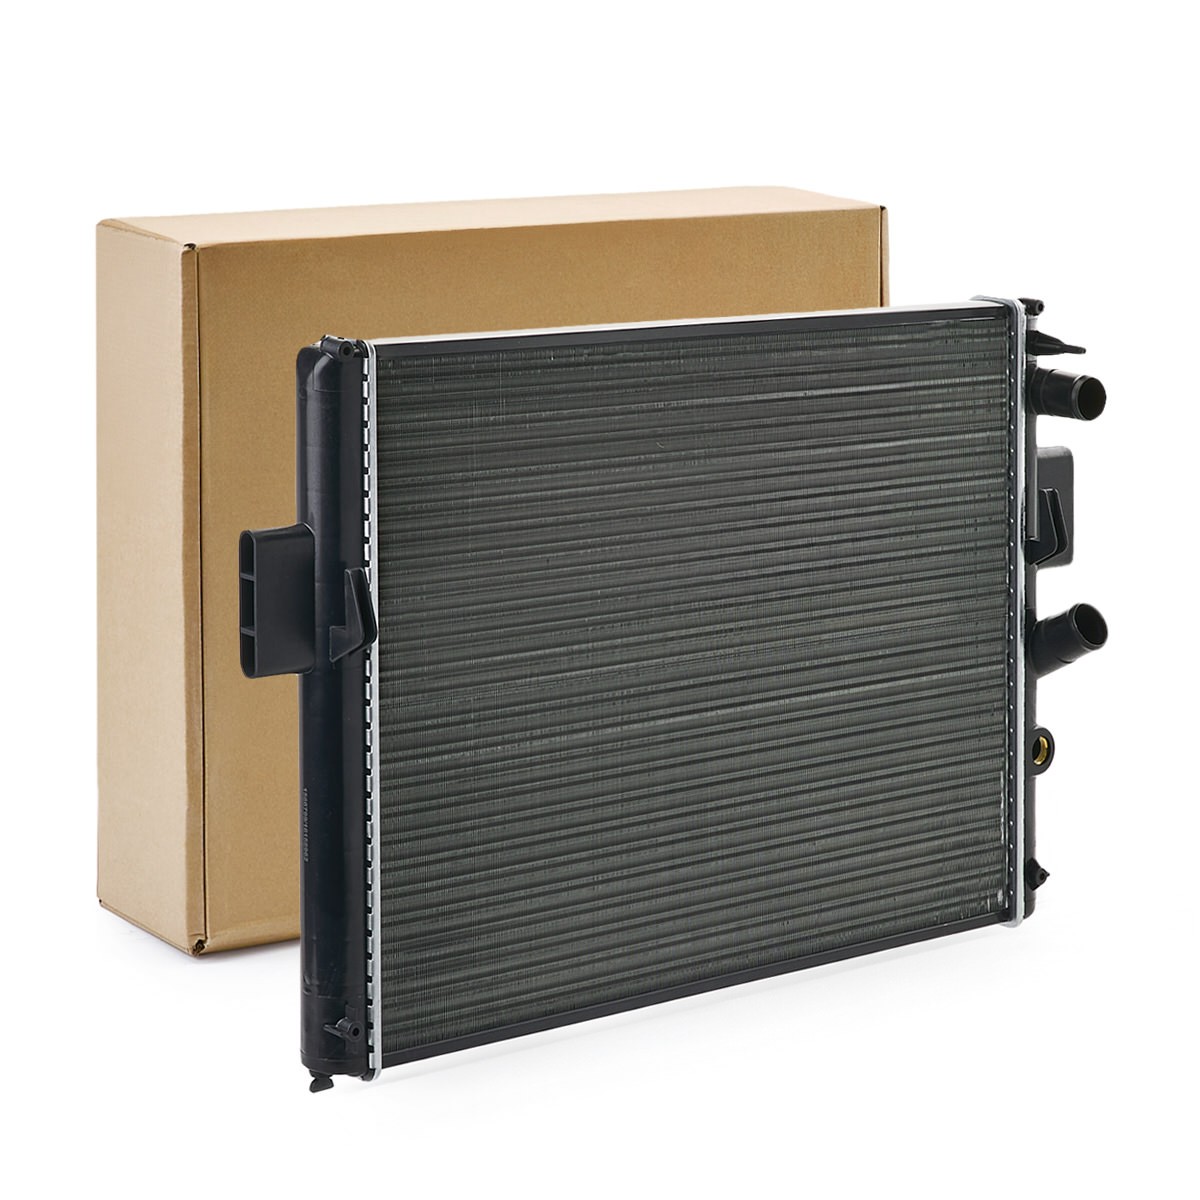 RIDEX 470R1199 Engine radiator Aluminium, Plastic, for vehicles without air conditioning, without bracket, Manual Transmission